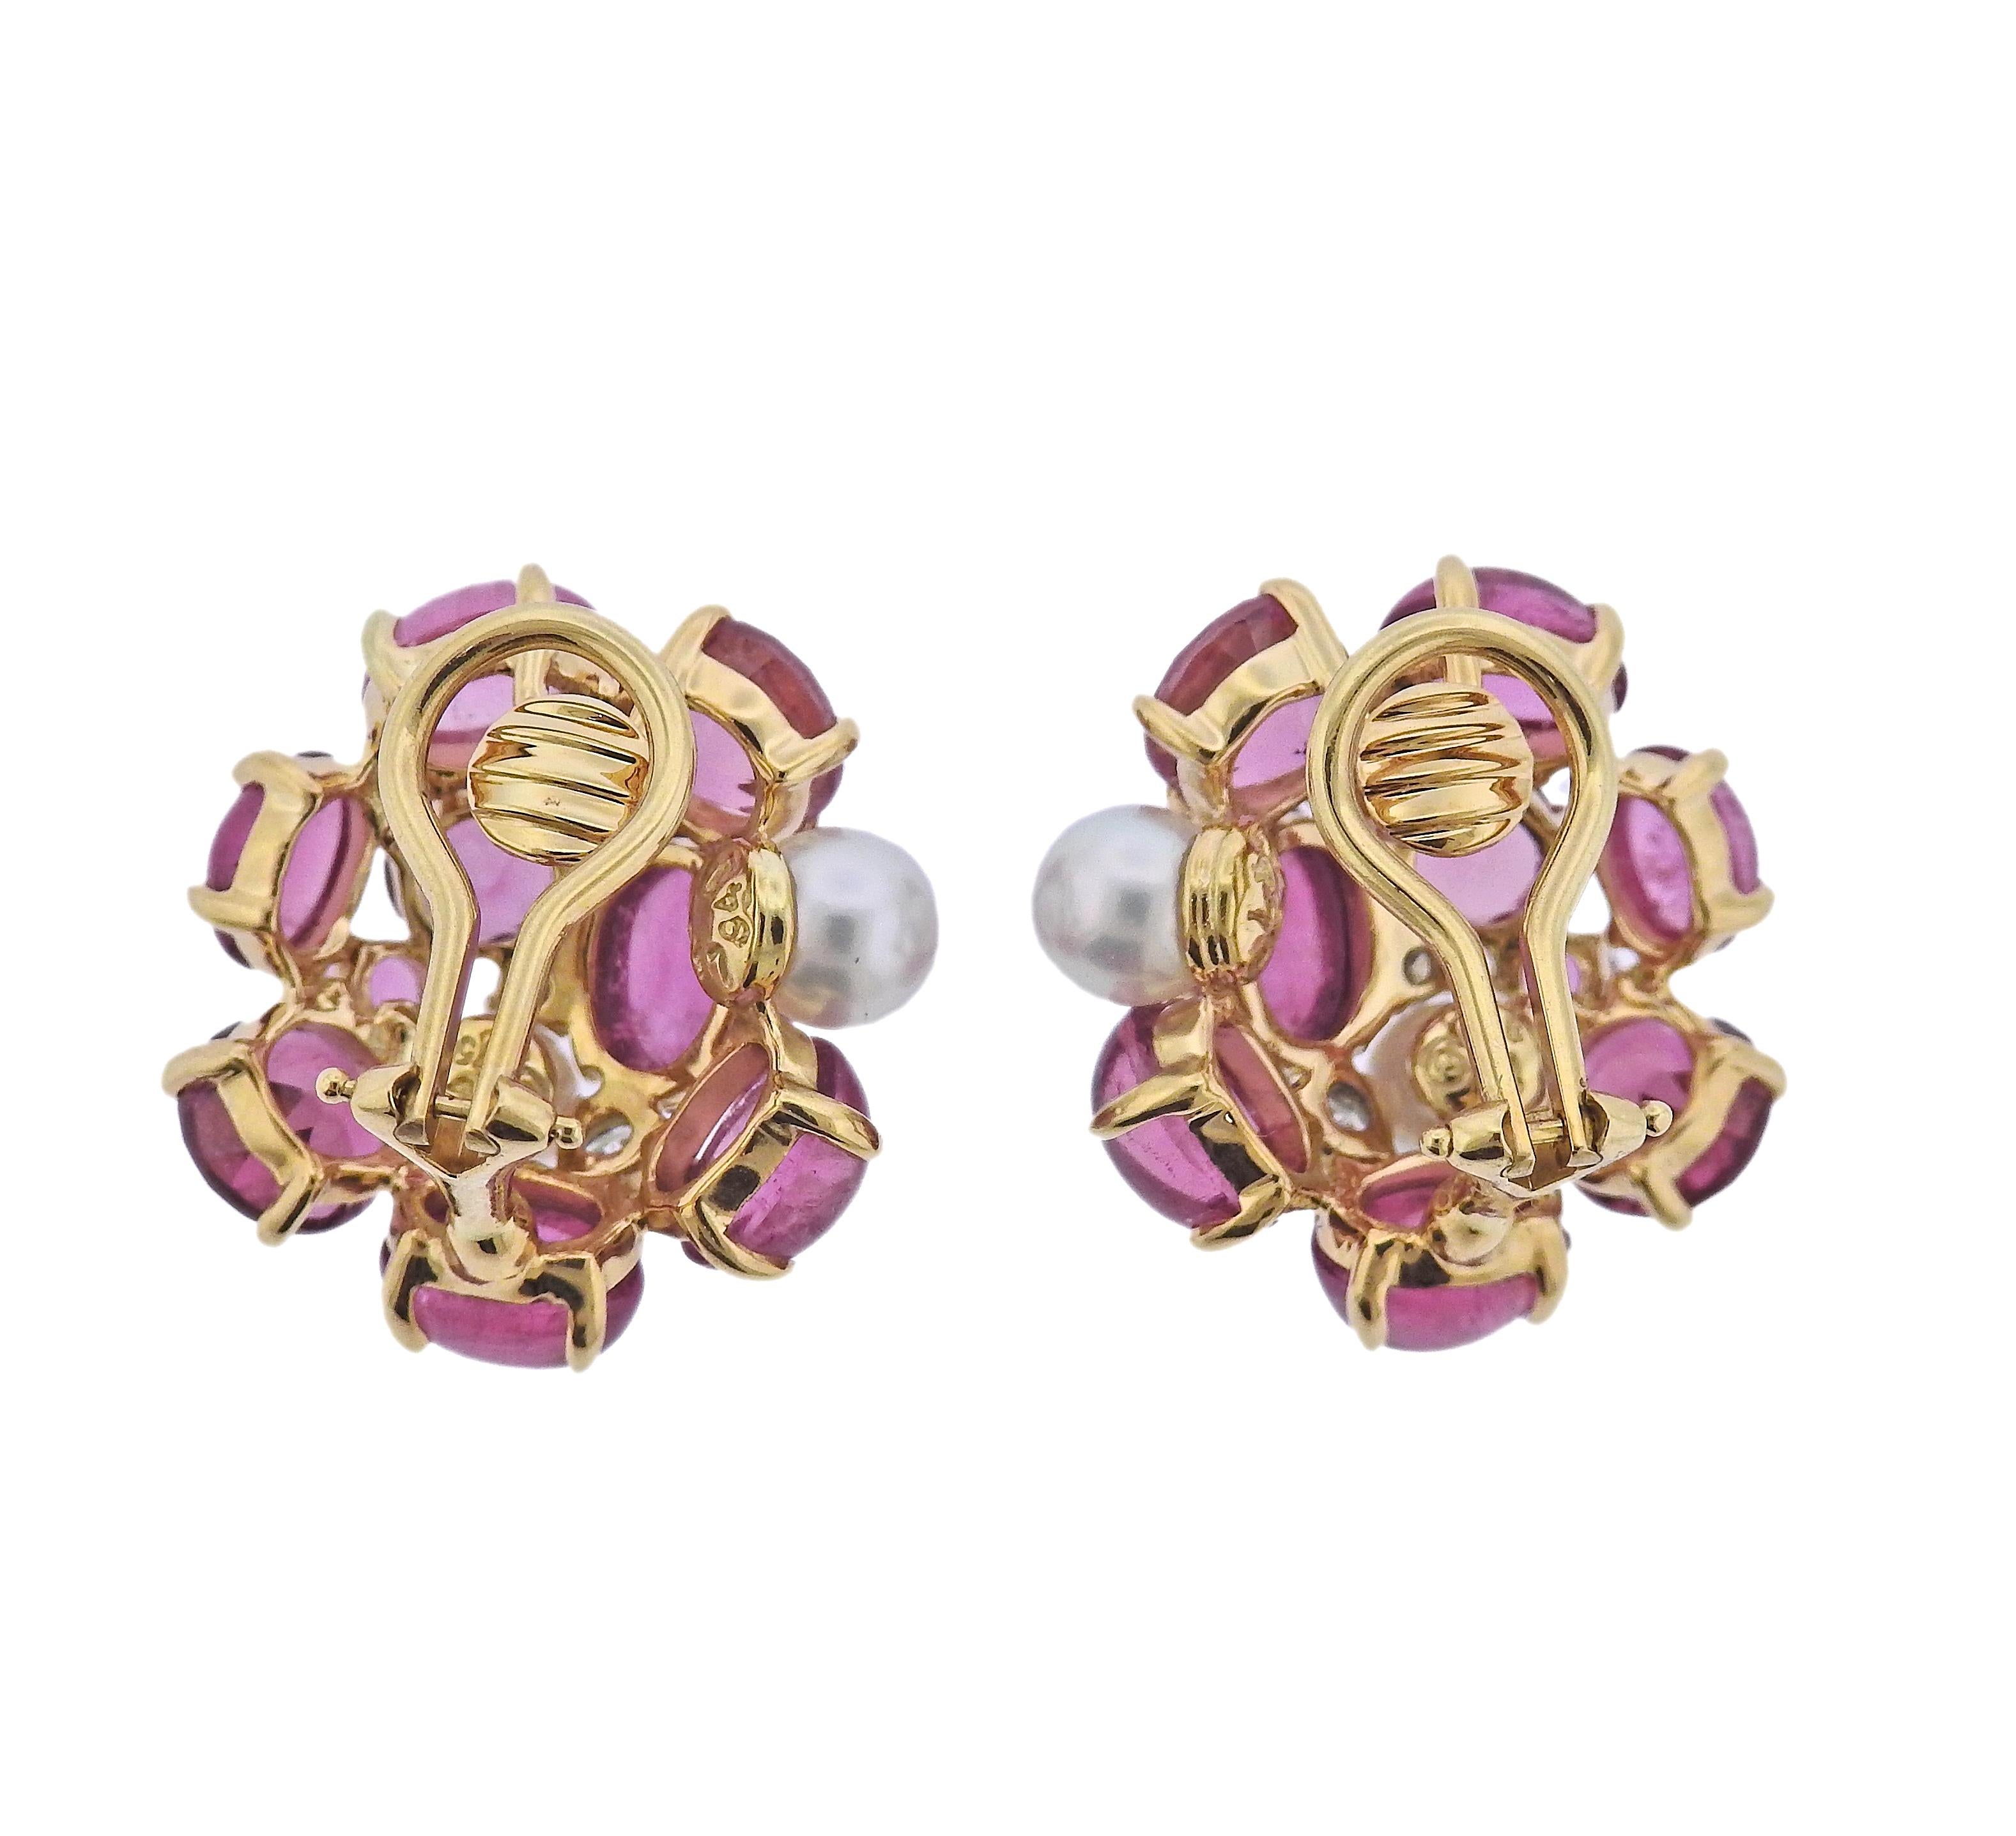 Pair of 18k yellow gold earrings crafted by Seaman Schepps for the Bubble collection, featuring pink tourmaline, diamond and pearl.  Earrings measure approx. 20mm in diameter, weight - 13.3 grams. Marked: 750, 247941, Seaman Schepps, Shell hallmark.